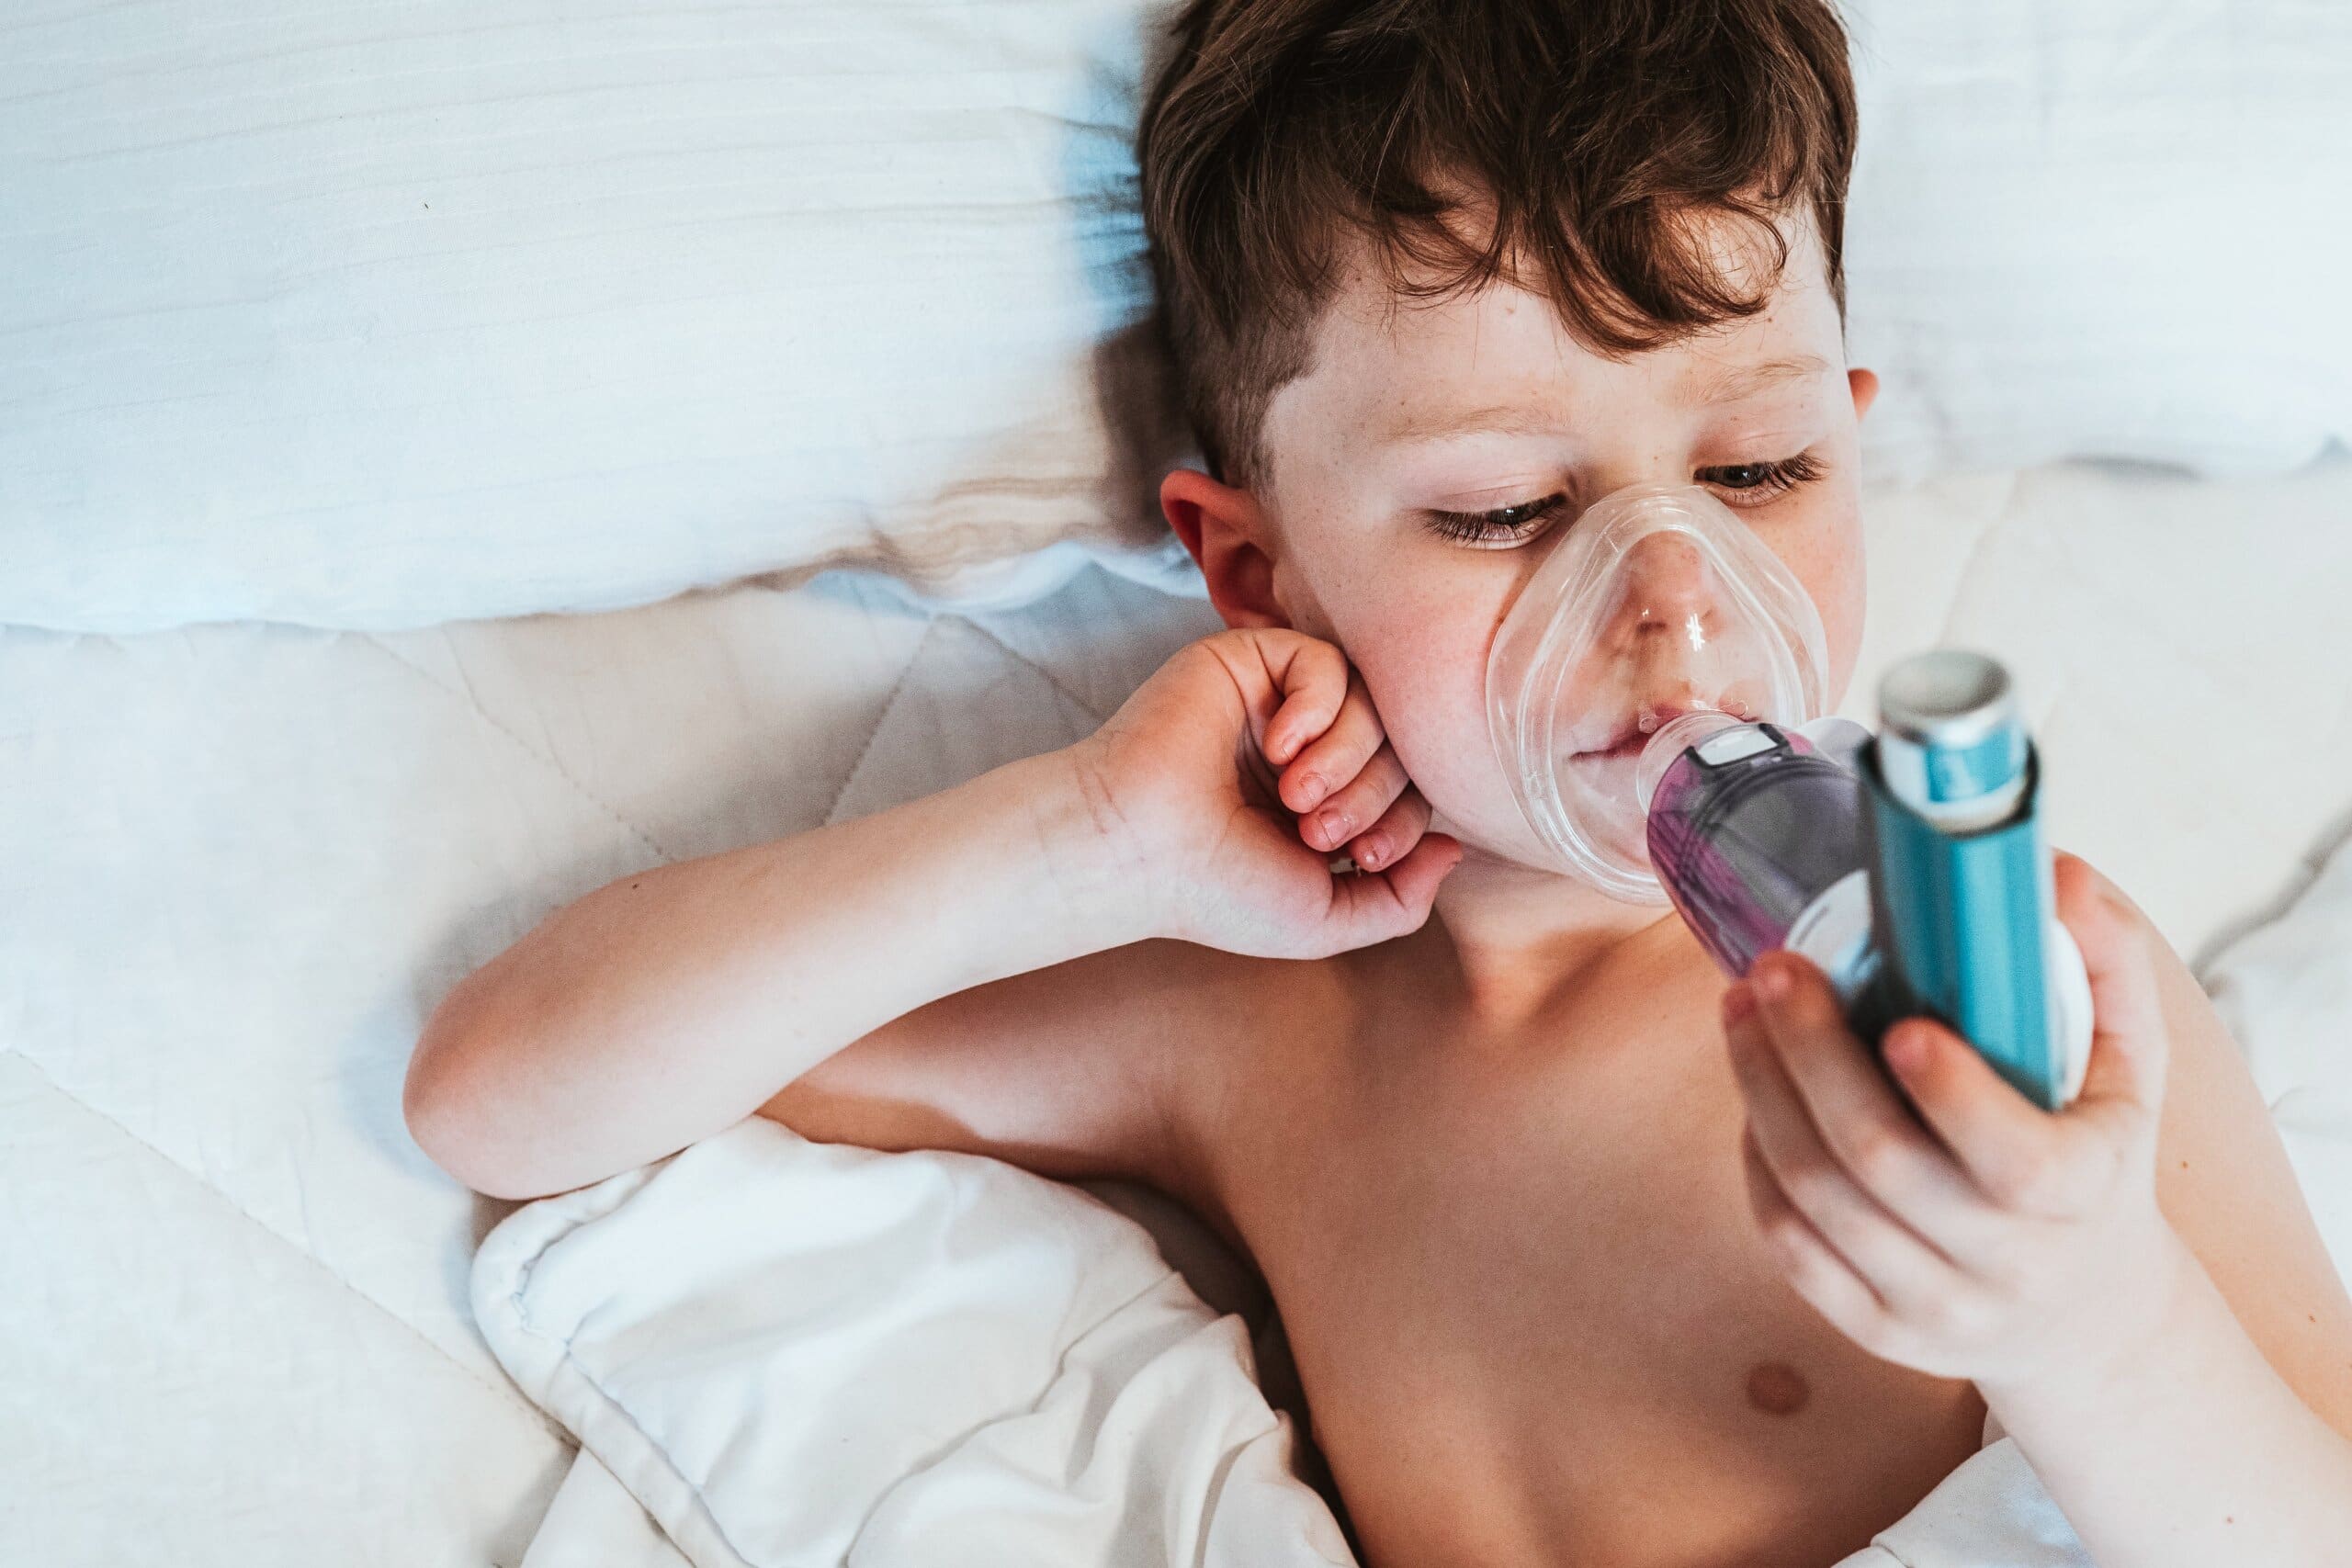 Young boy in bed using an inhaler.